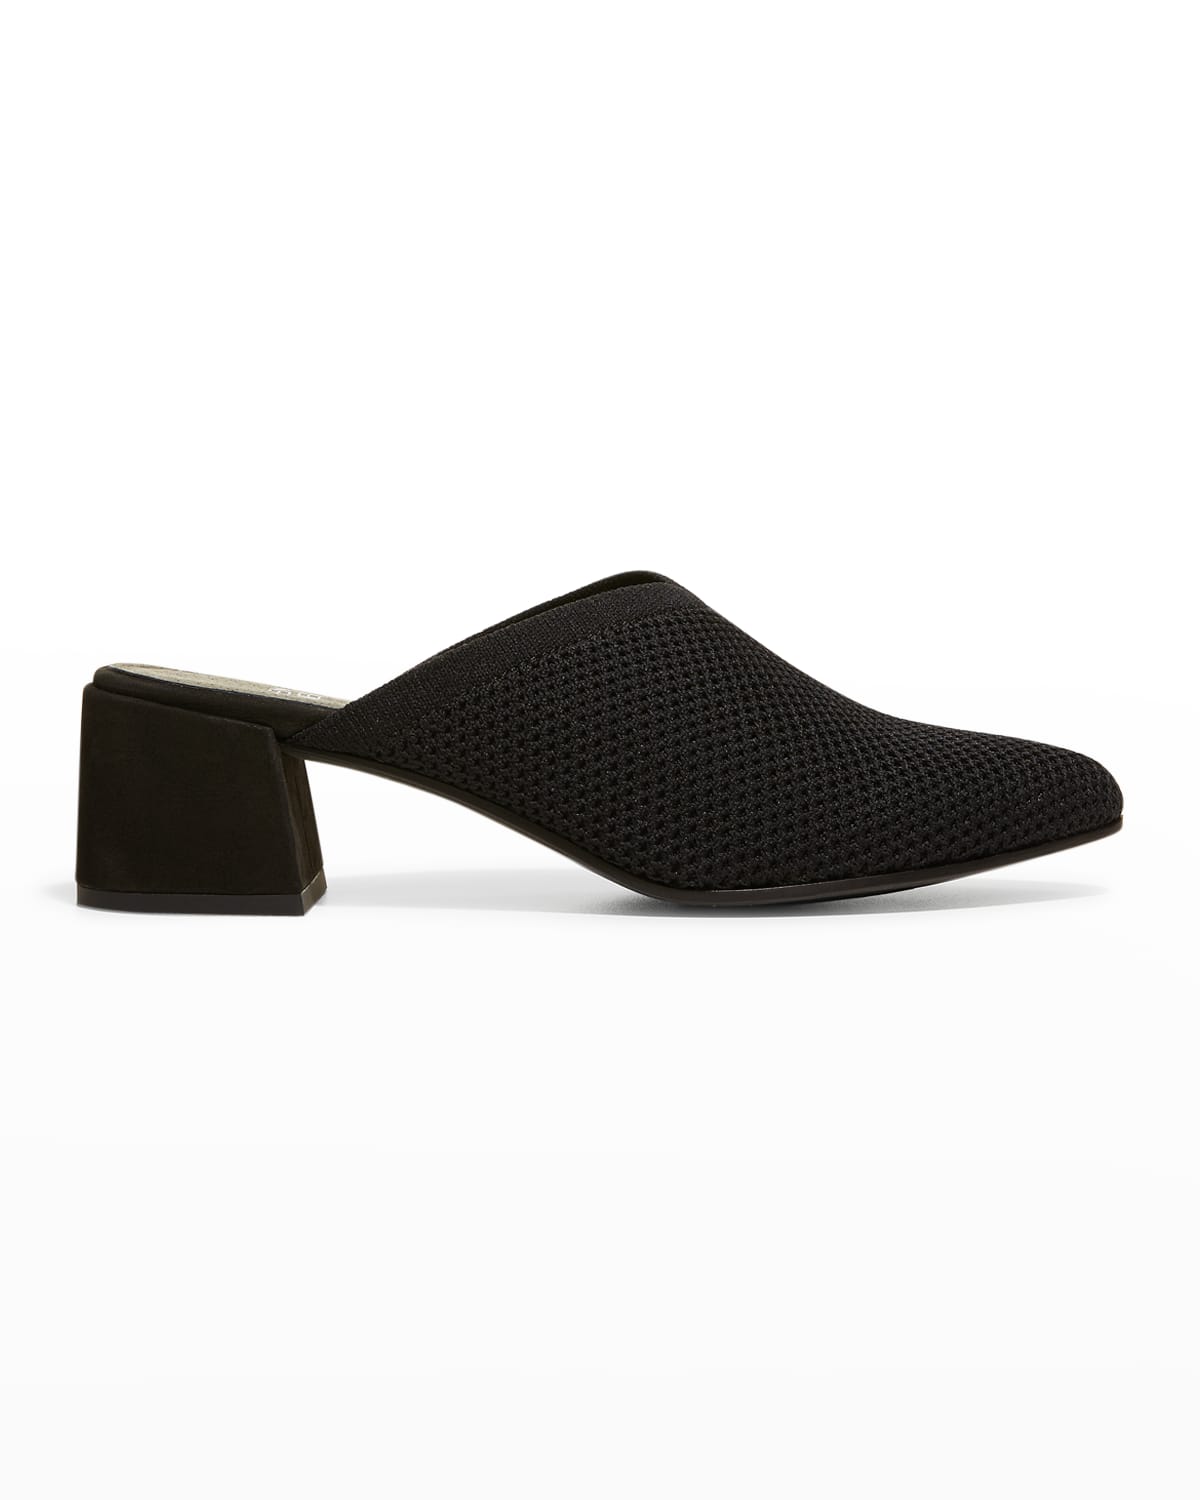 EILEEN FISHER GEST STRETCH KNIT MULES